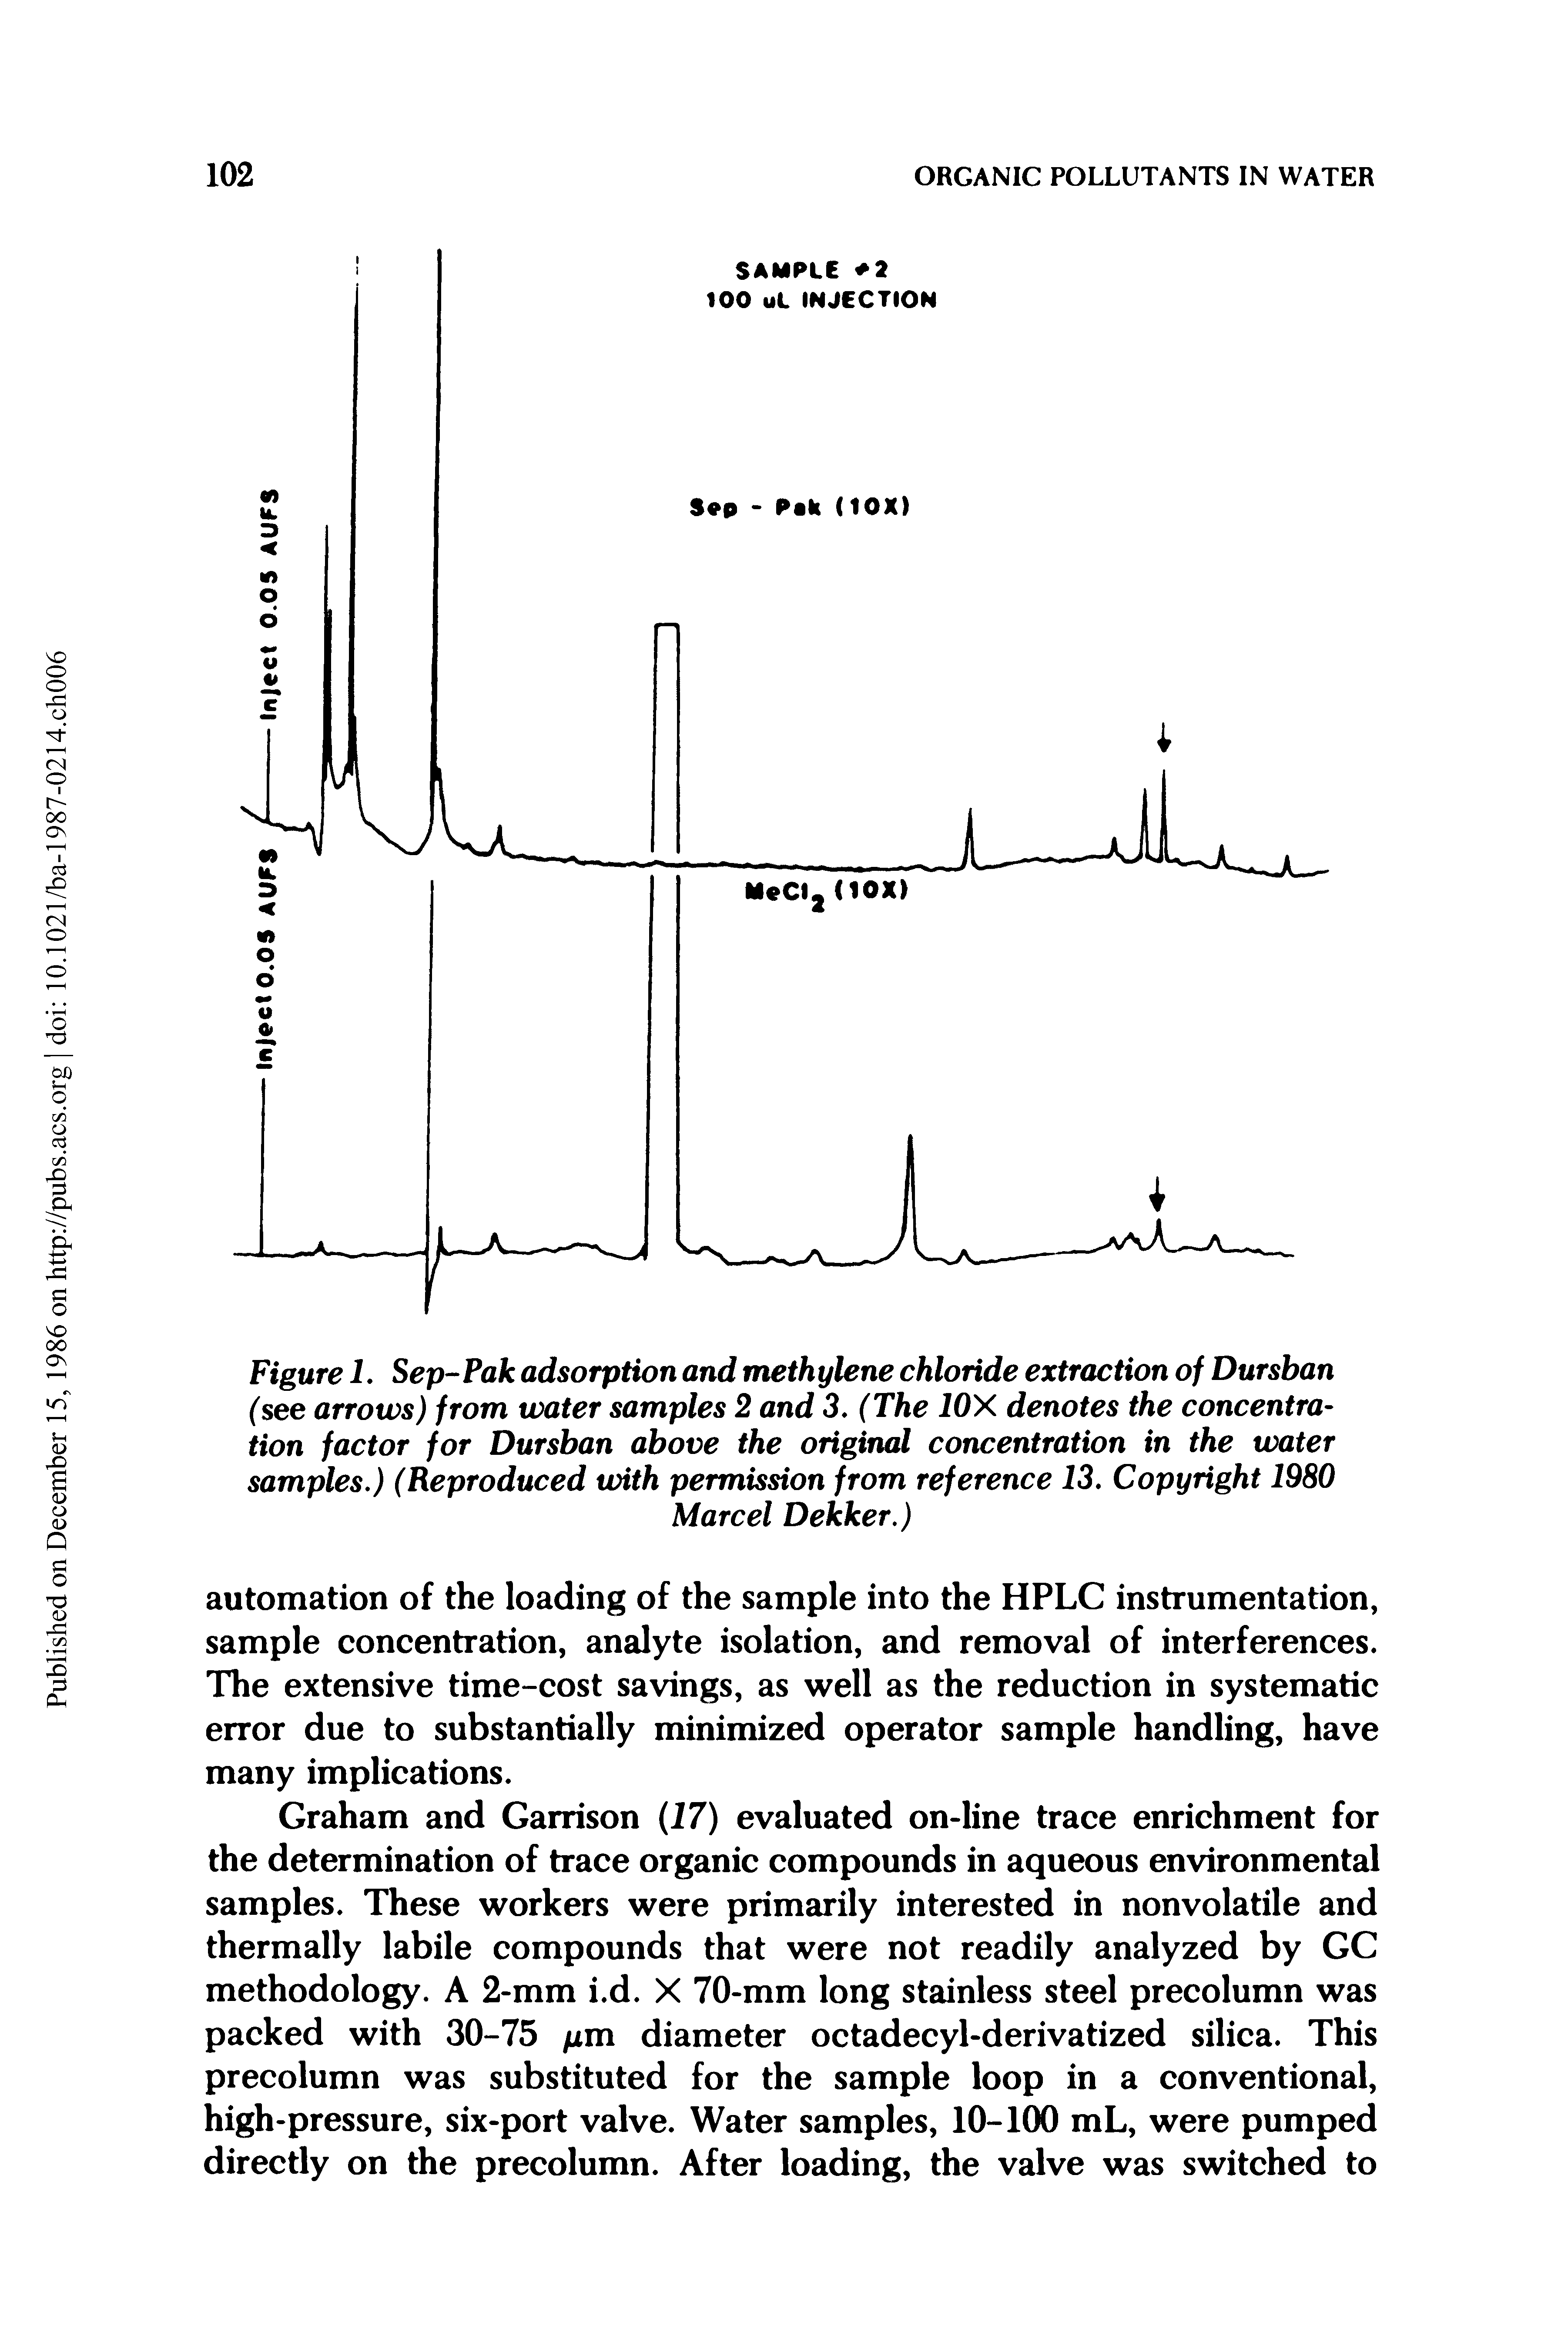 Figure 1. Sep- Pak adsorption and meth ylene chloride extraction of Dursban (see arrows) from water samples 2 and 3. (The 10X denotes the concentration factor for Dursban above the original concentration in the water samples.) (Reproduced with permission from reference 13. Copyright 1980...